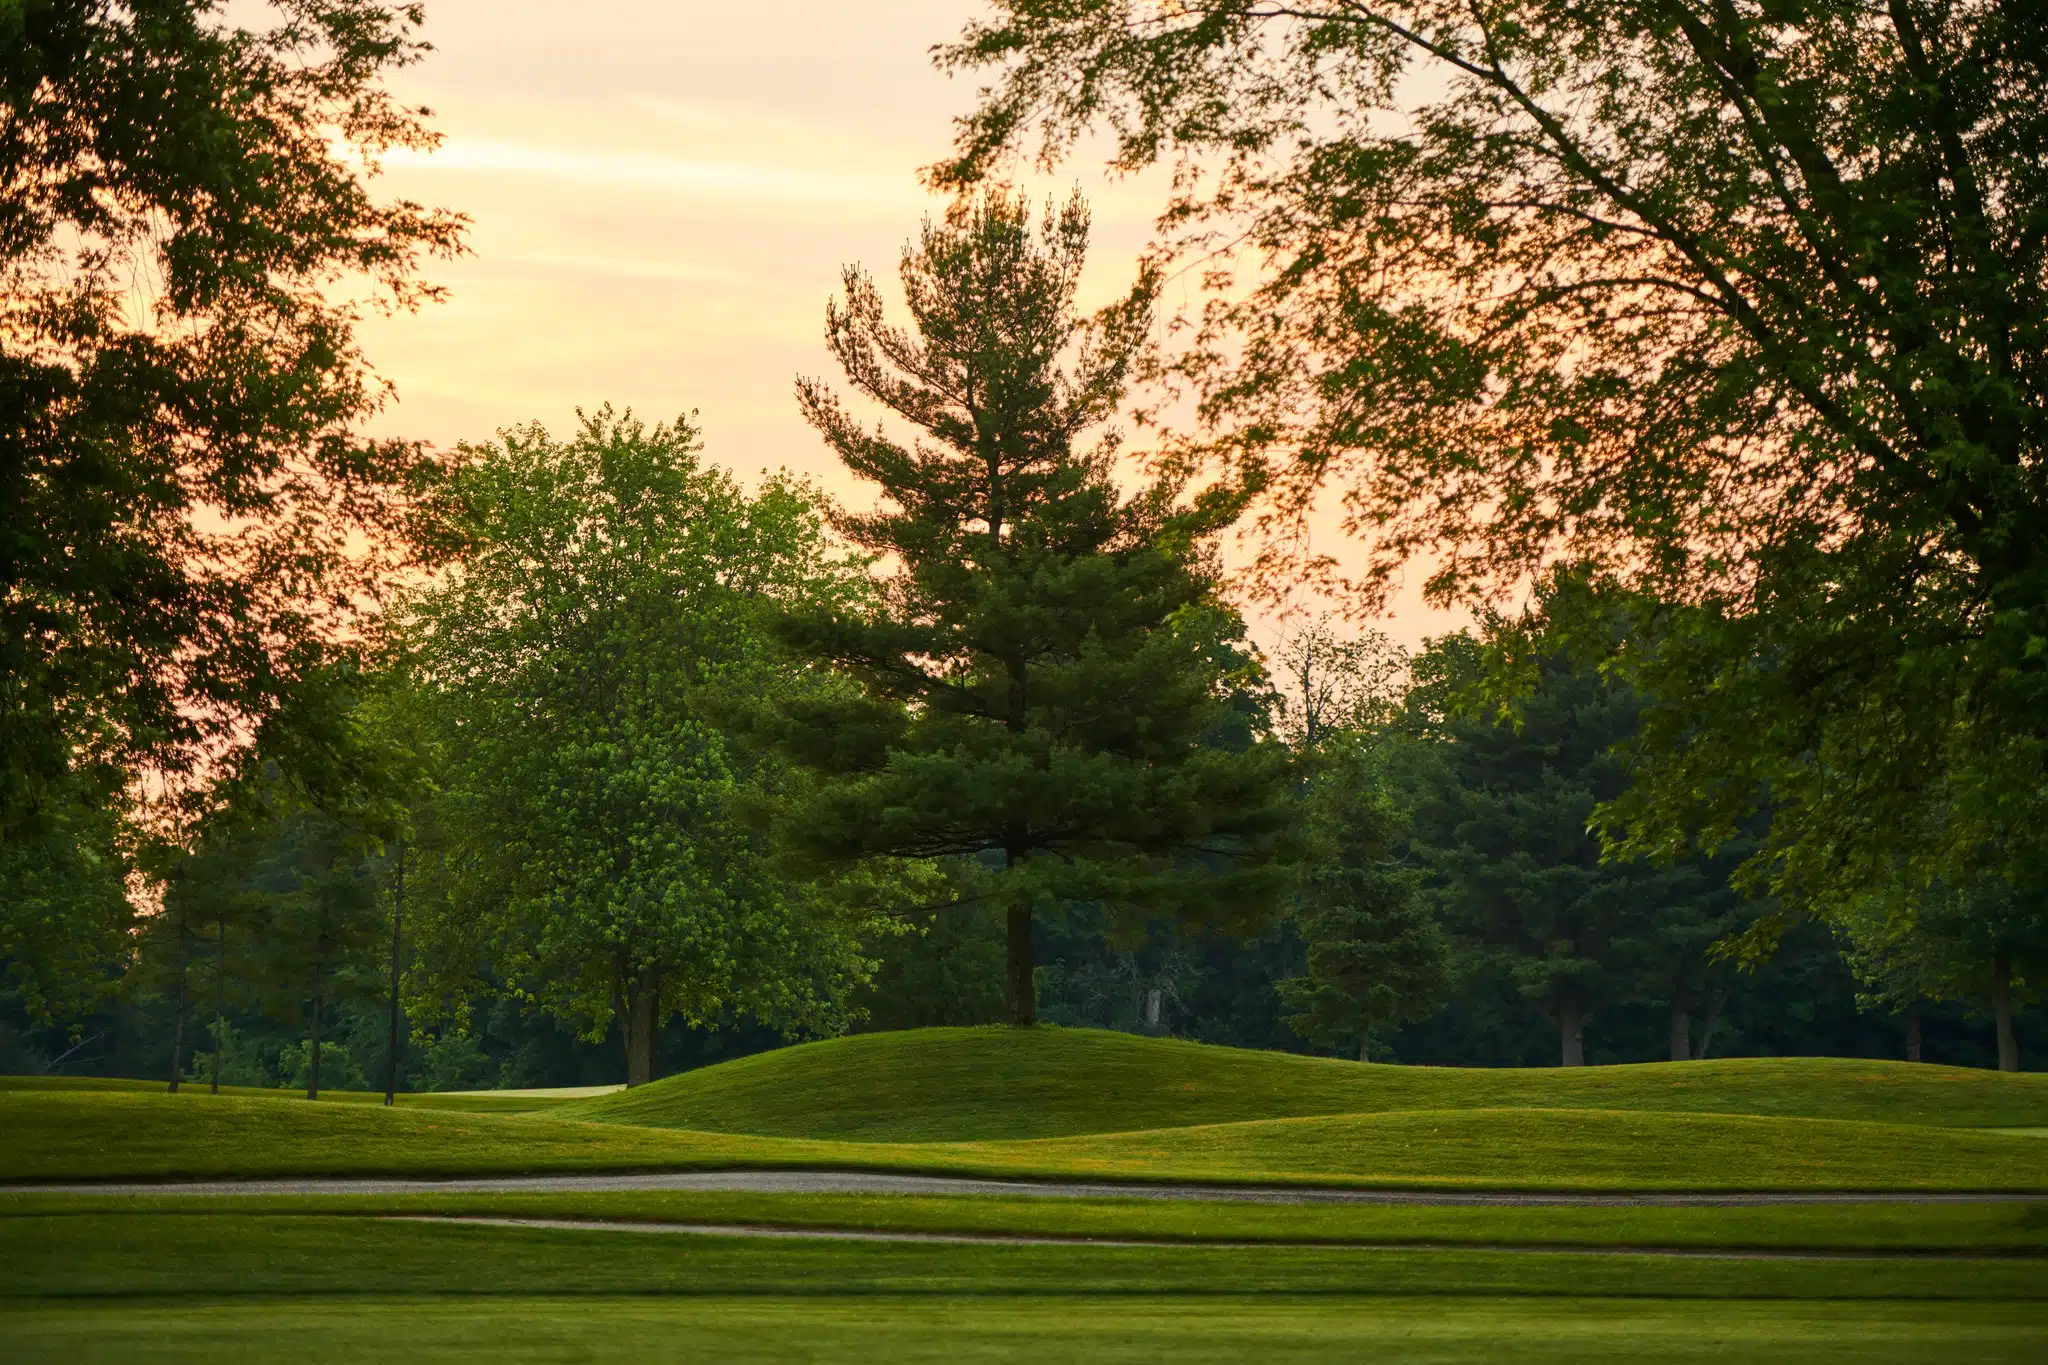 Sunrise at century pines within a treed area.